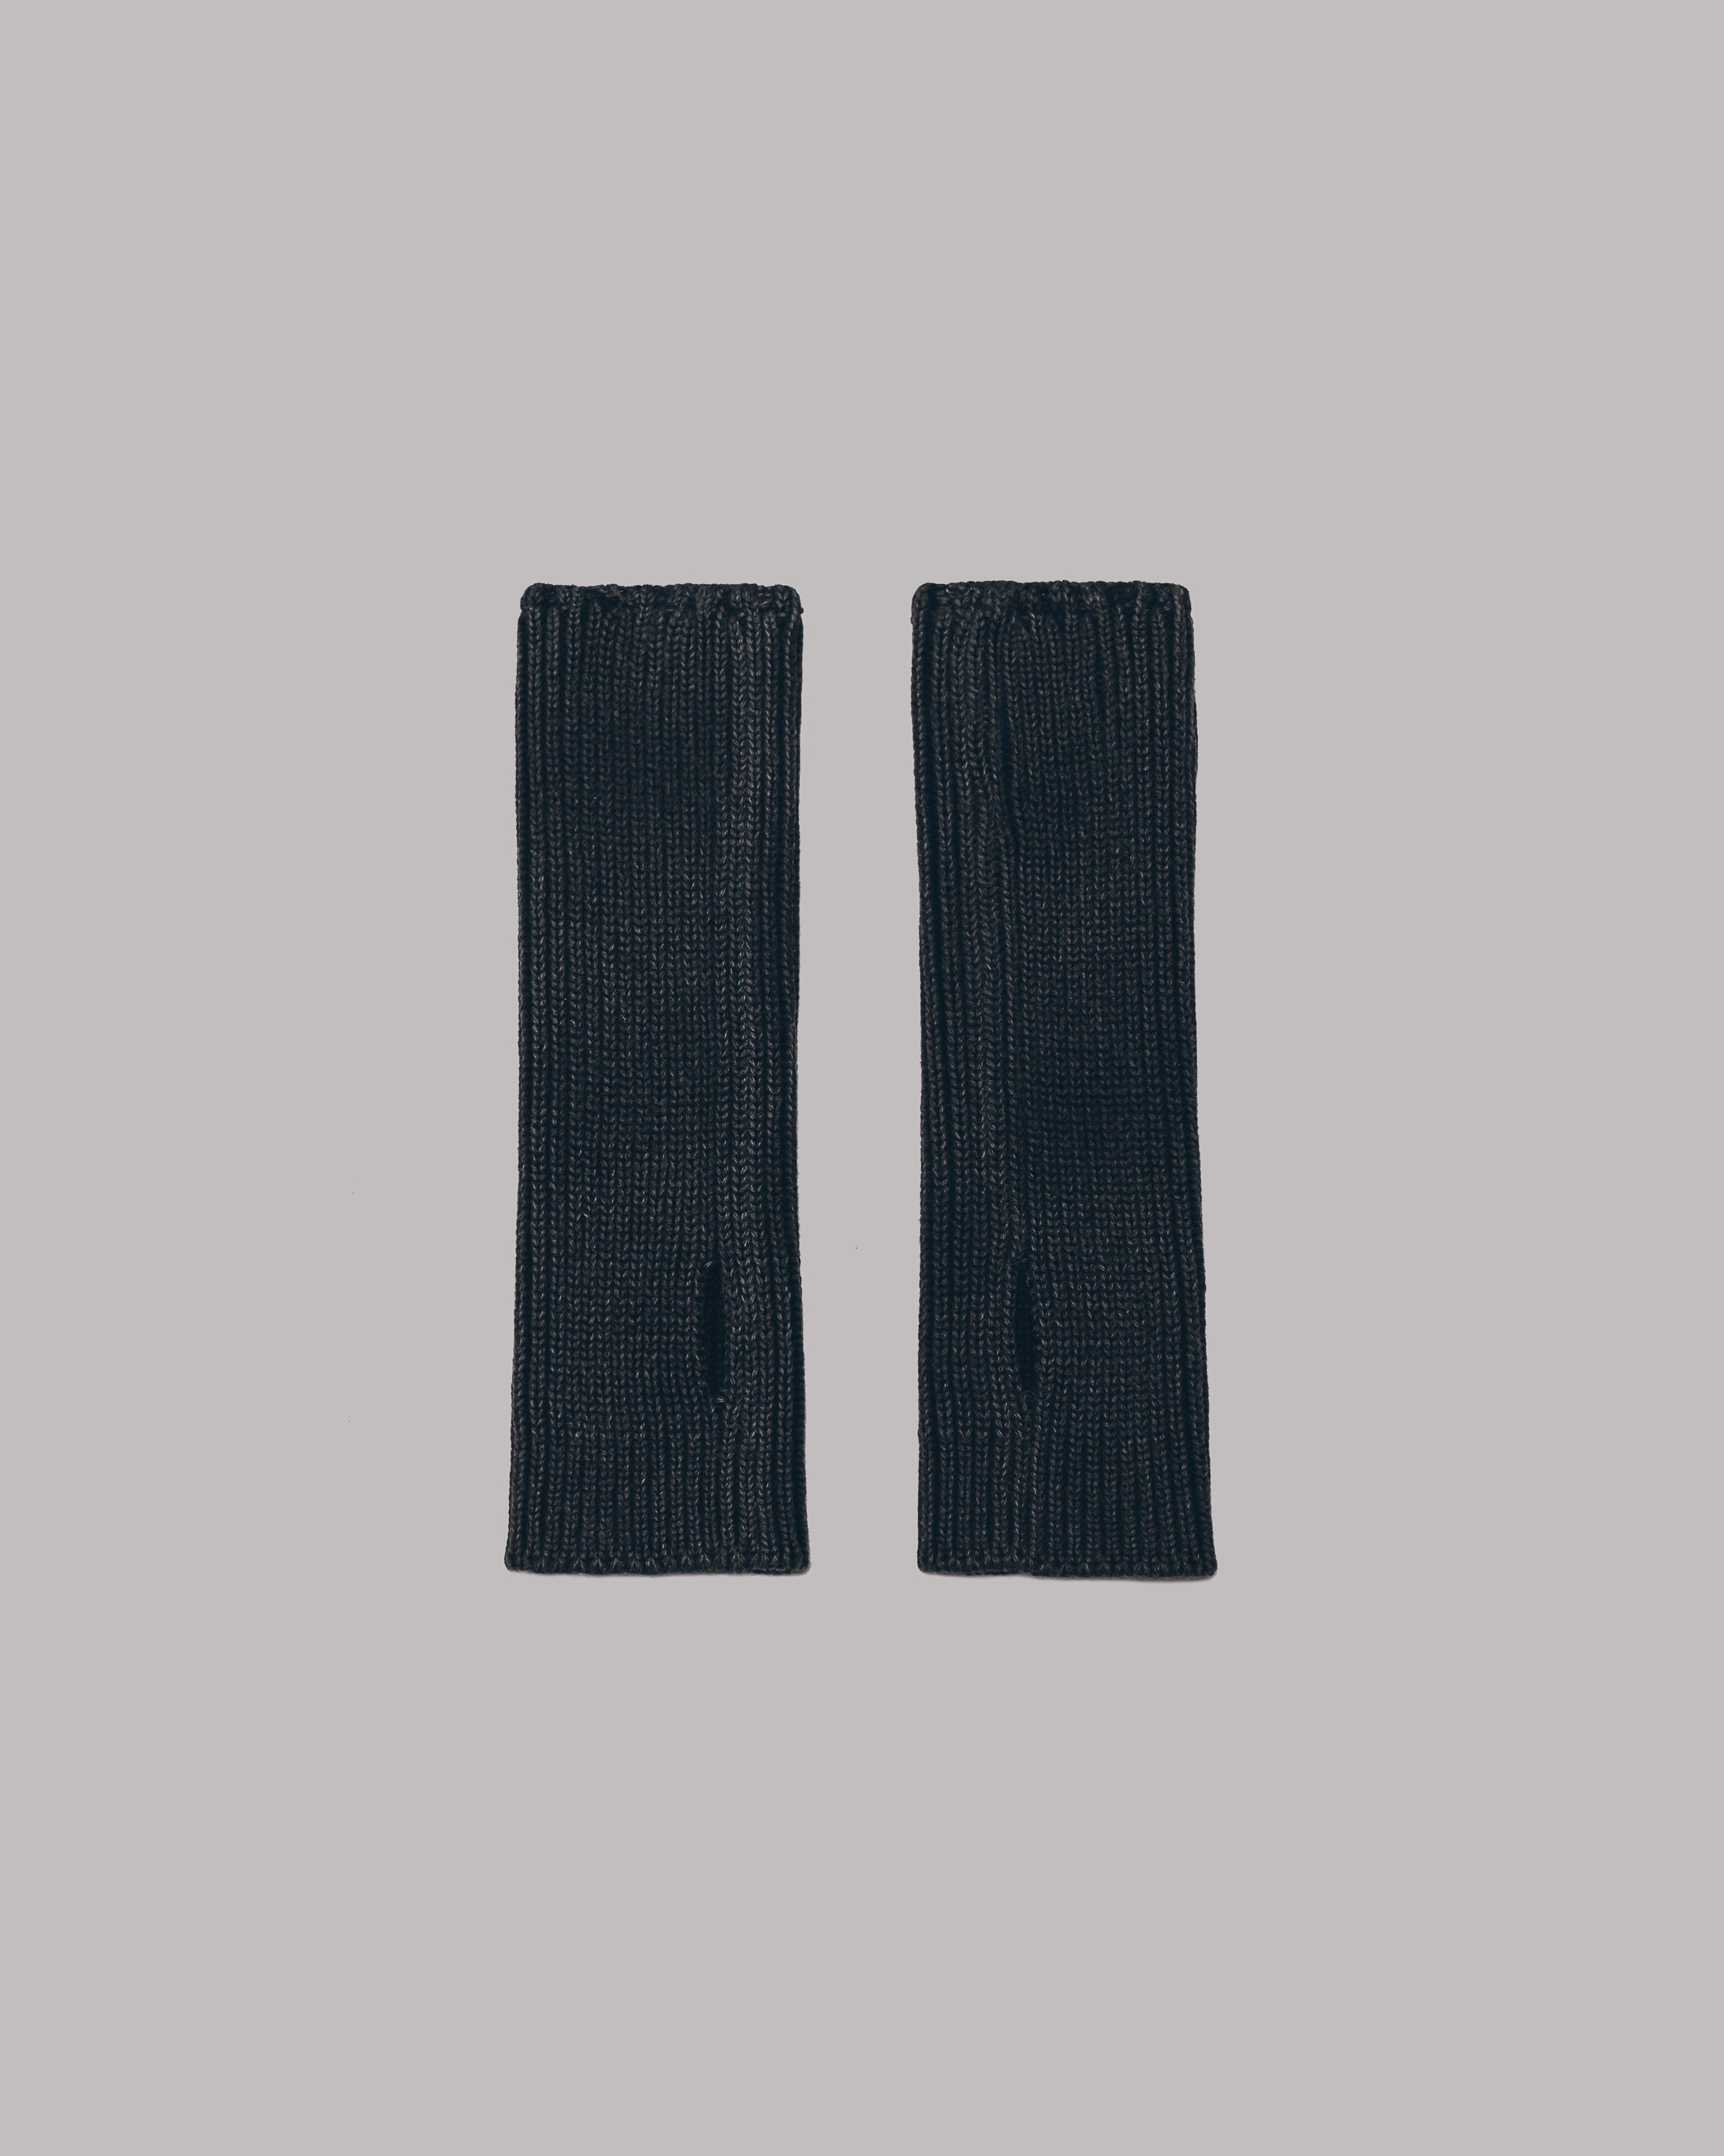 The Dark Faded Knit Gloves